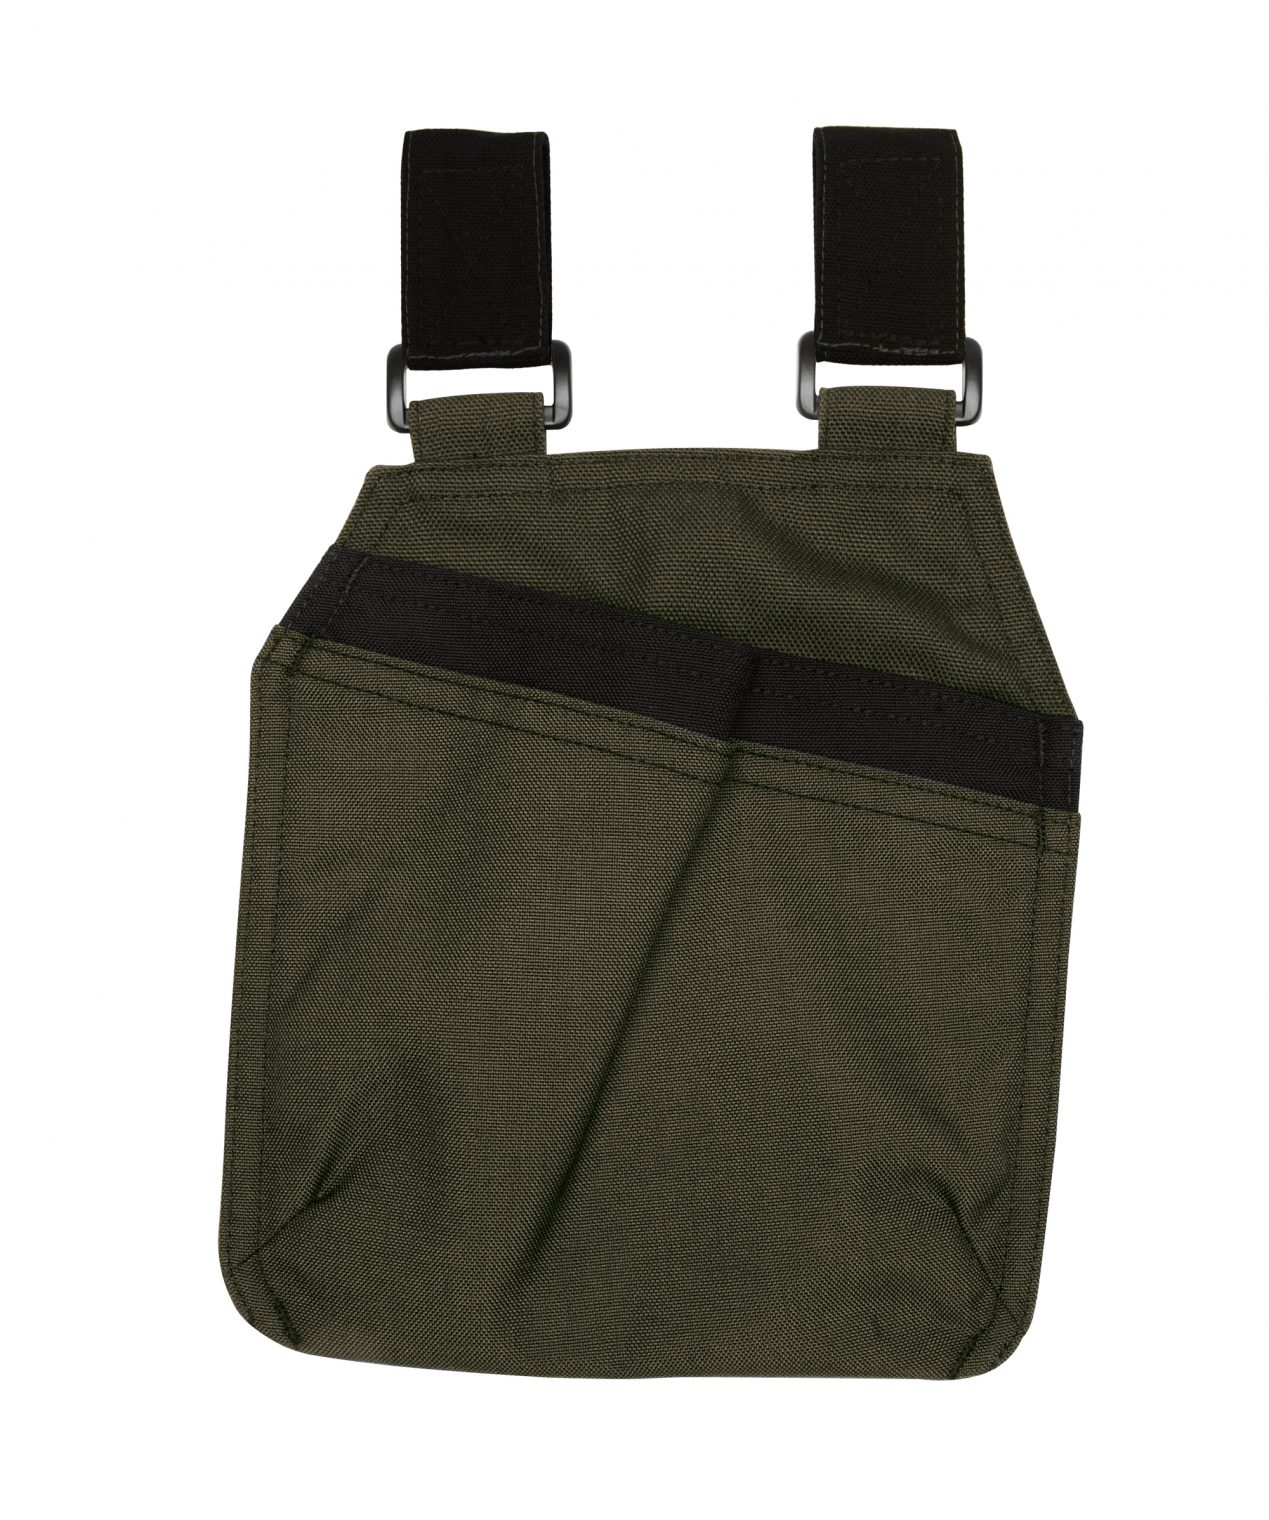 gordon with loops canvas tool pouches per pair with velcro loops olive green black back